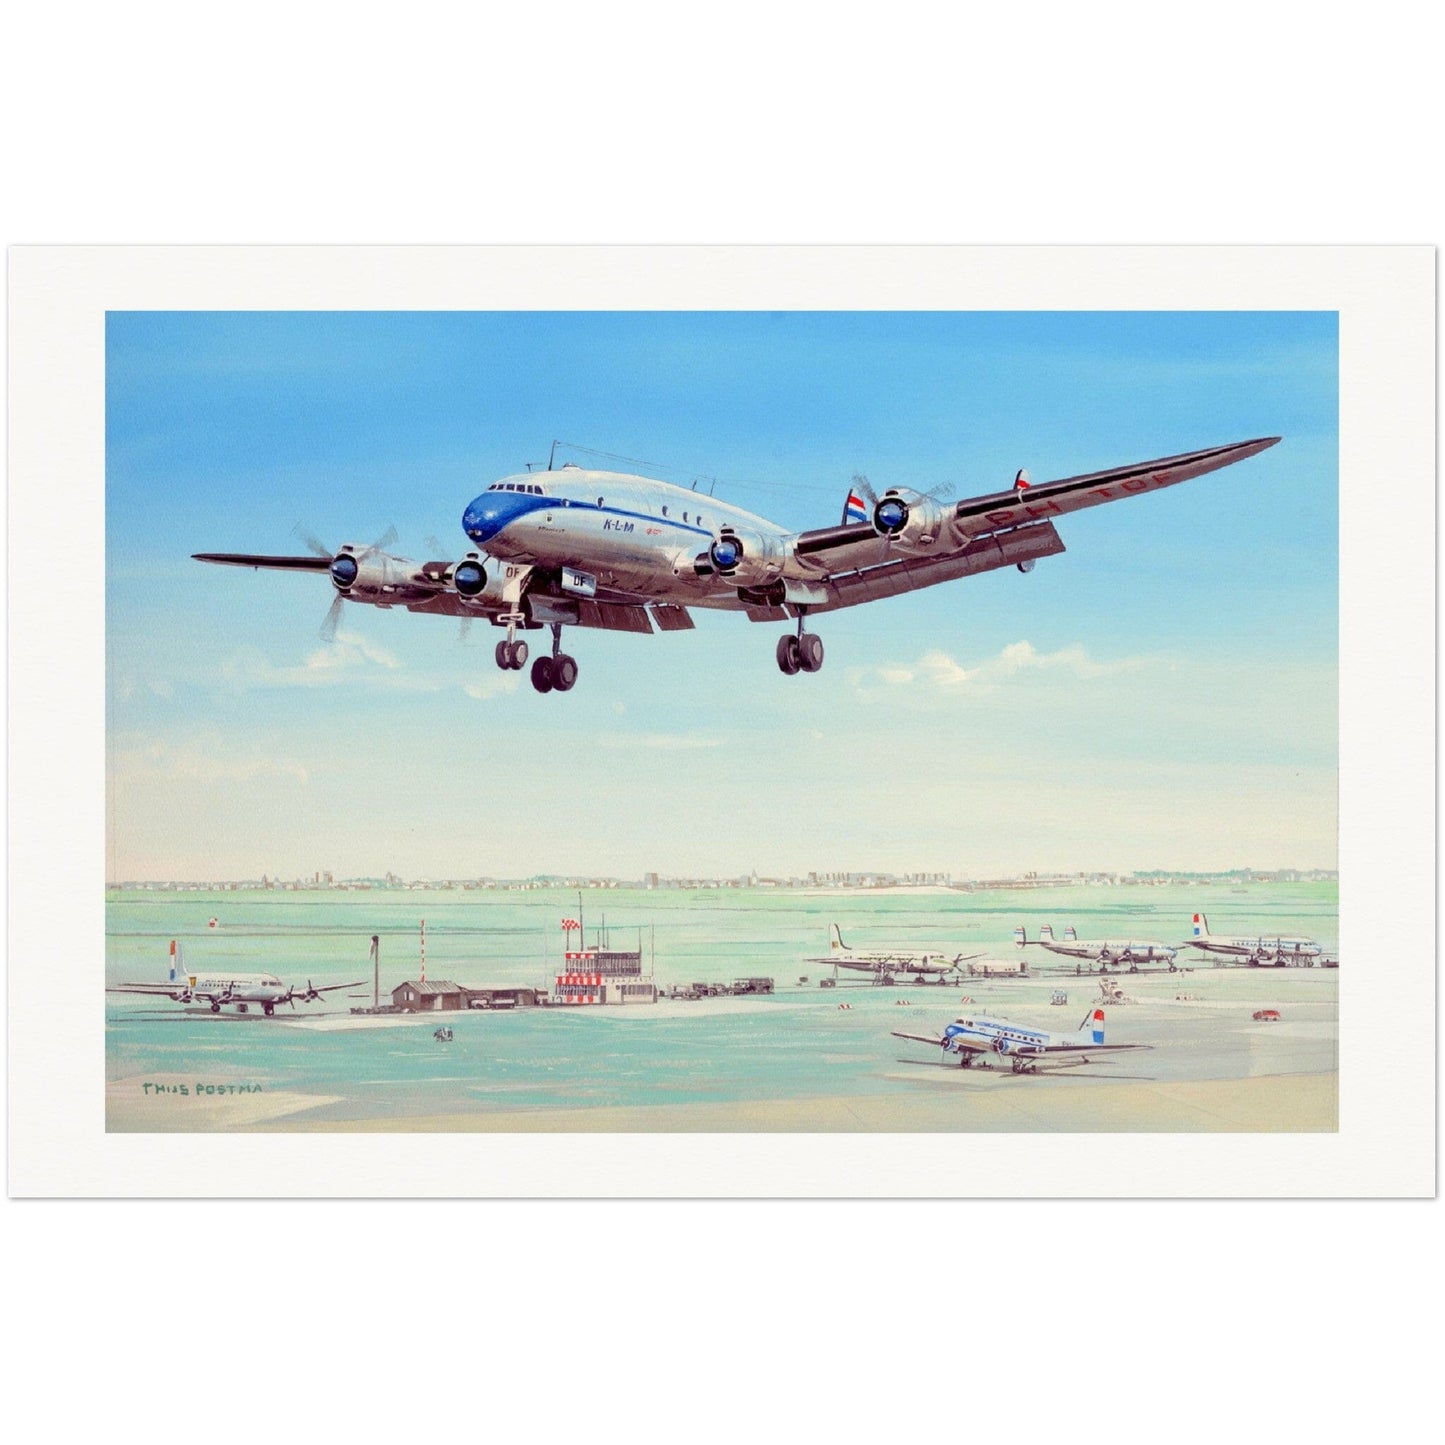 Thijs Postma - Poster - Lockheed L-49 Constellation Over Schiphol 1946-47 Poster Only TP Aviation Art 60x90 cm / 24x36″ 